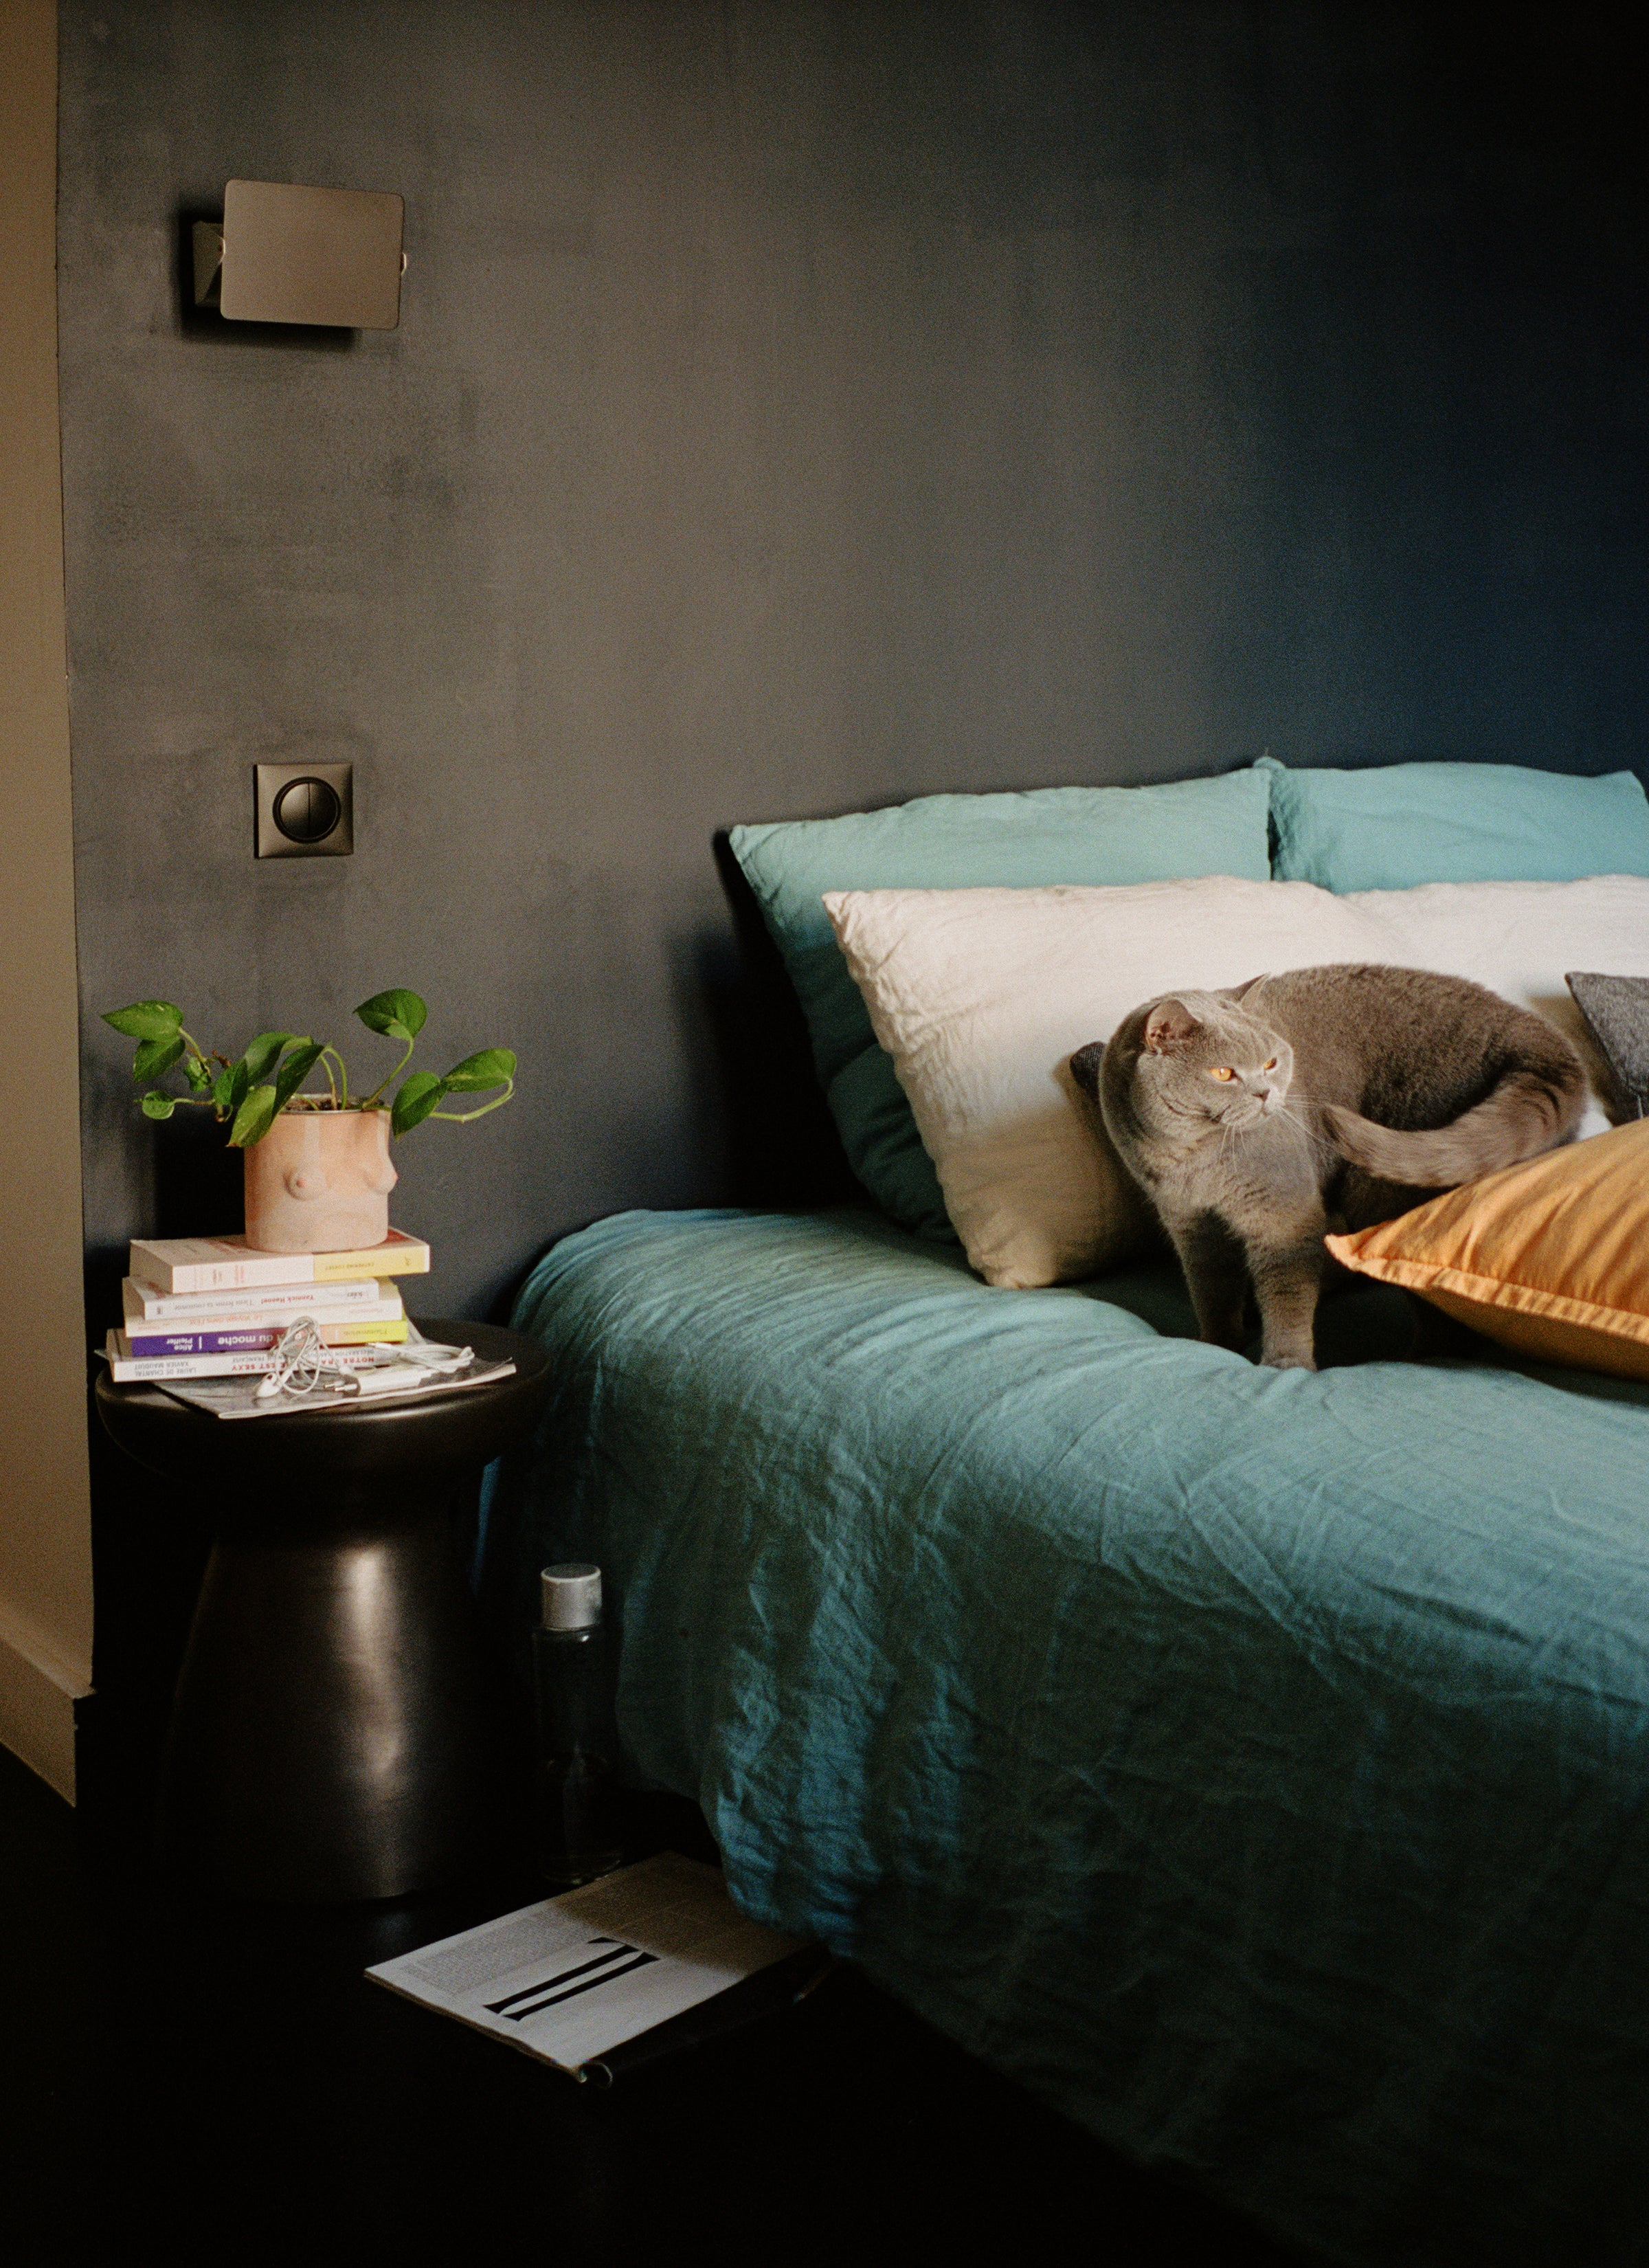 A blue-grey cat on the bed with a light greenish blue duvet cover and pillows. Next to the bed, there’s a black bedside table with some books layered up and a pot of plants on top of it.